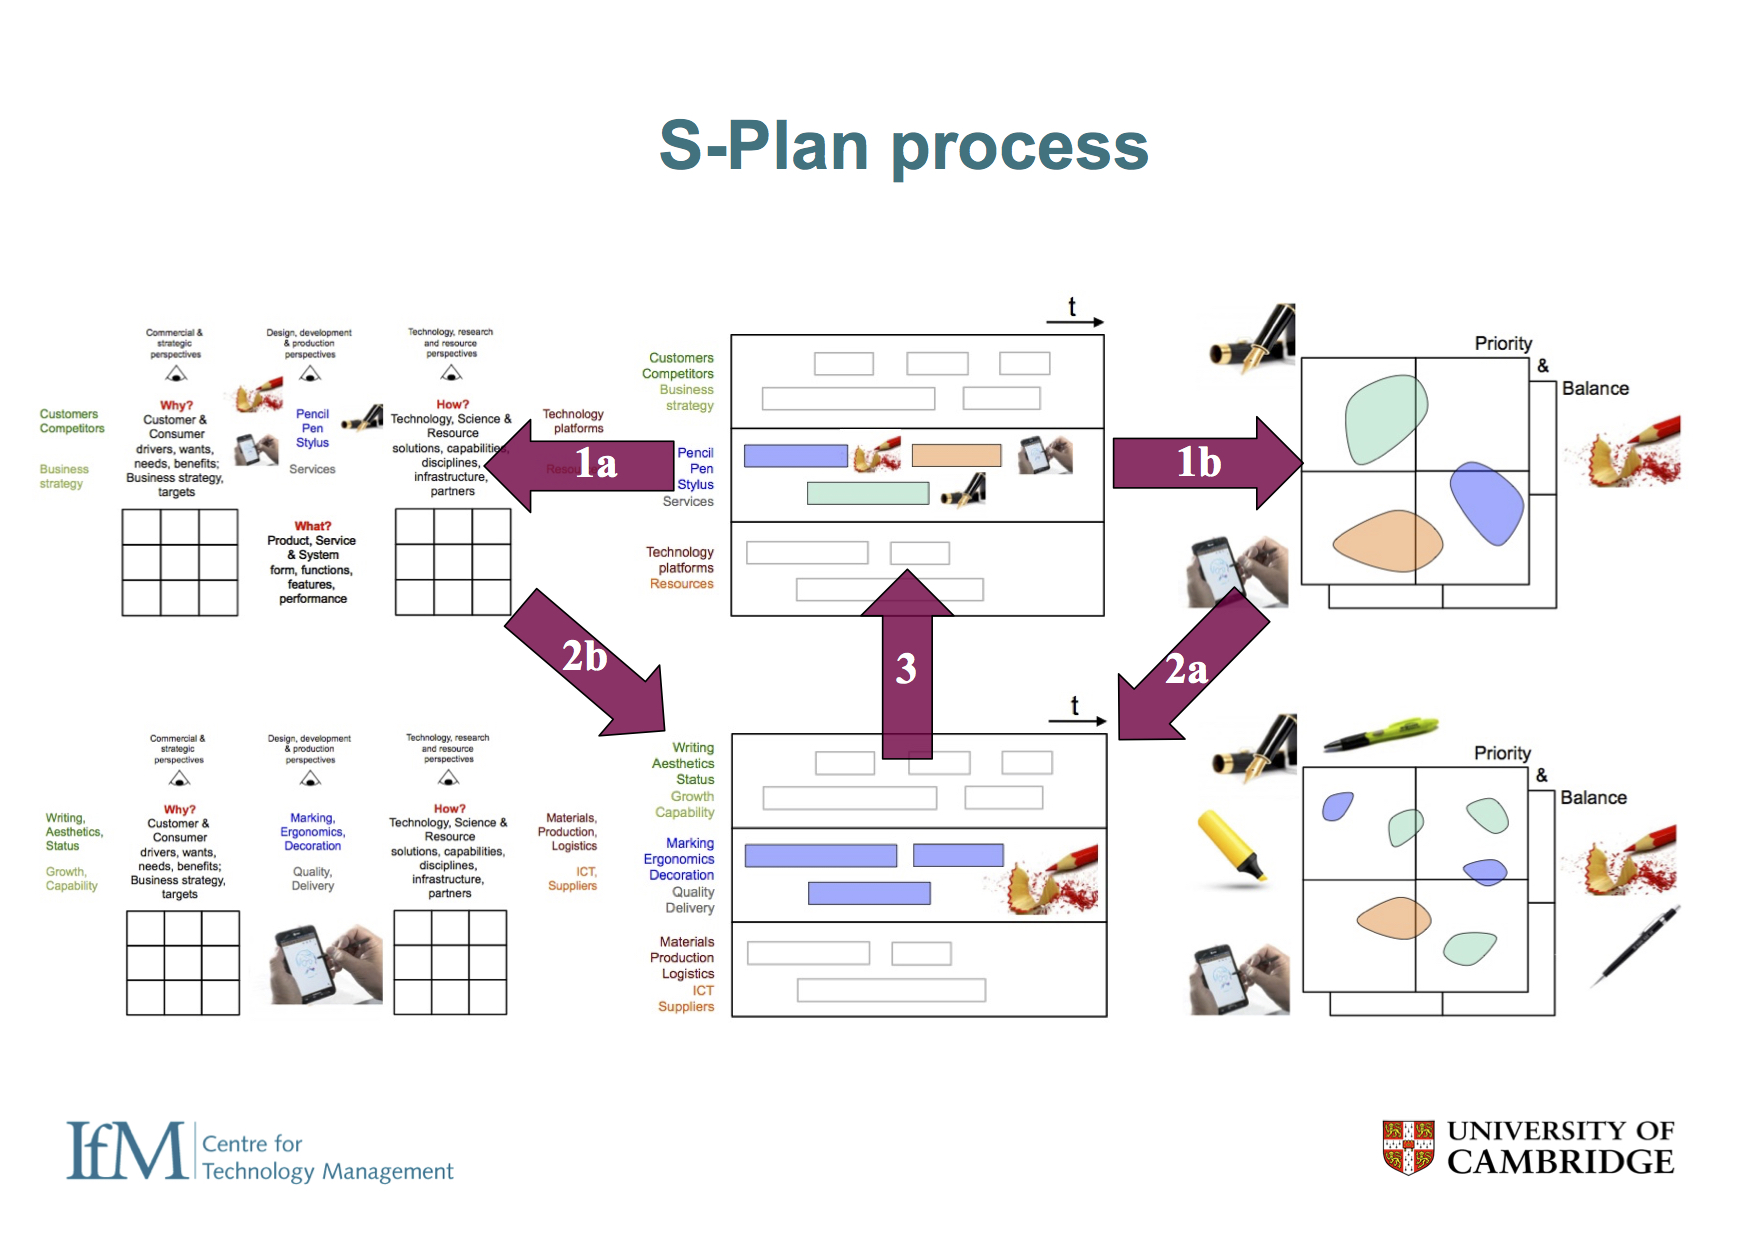  There is often confusion about the differences between the 'S-Plan' and 'T-Plan' Cambridge fast-start workshop methods, which can be easily distinguished when viewed through this scalable toolkit platform 'lens' - the methods use the same generic to